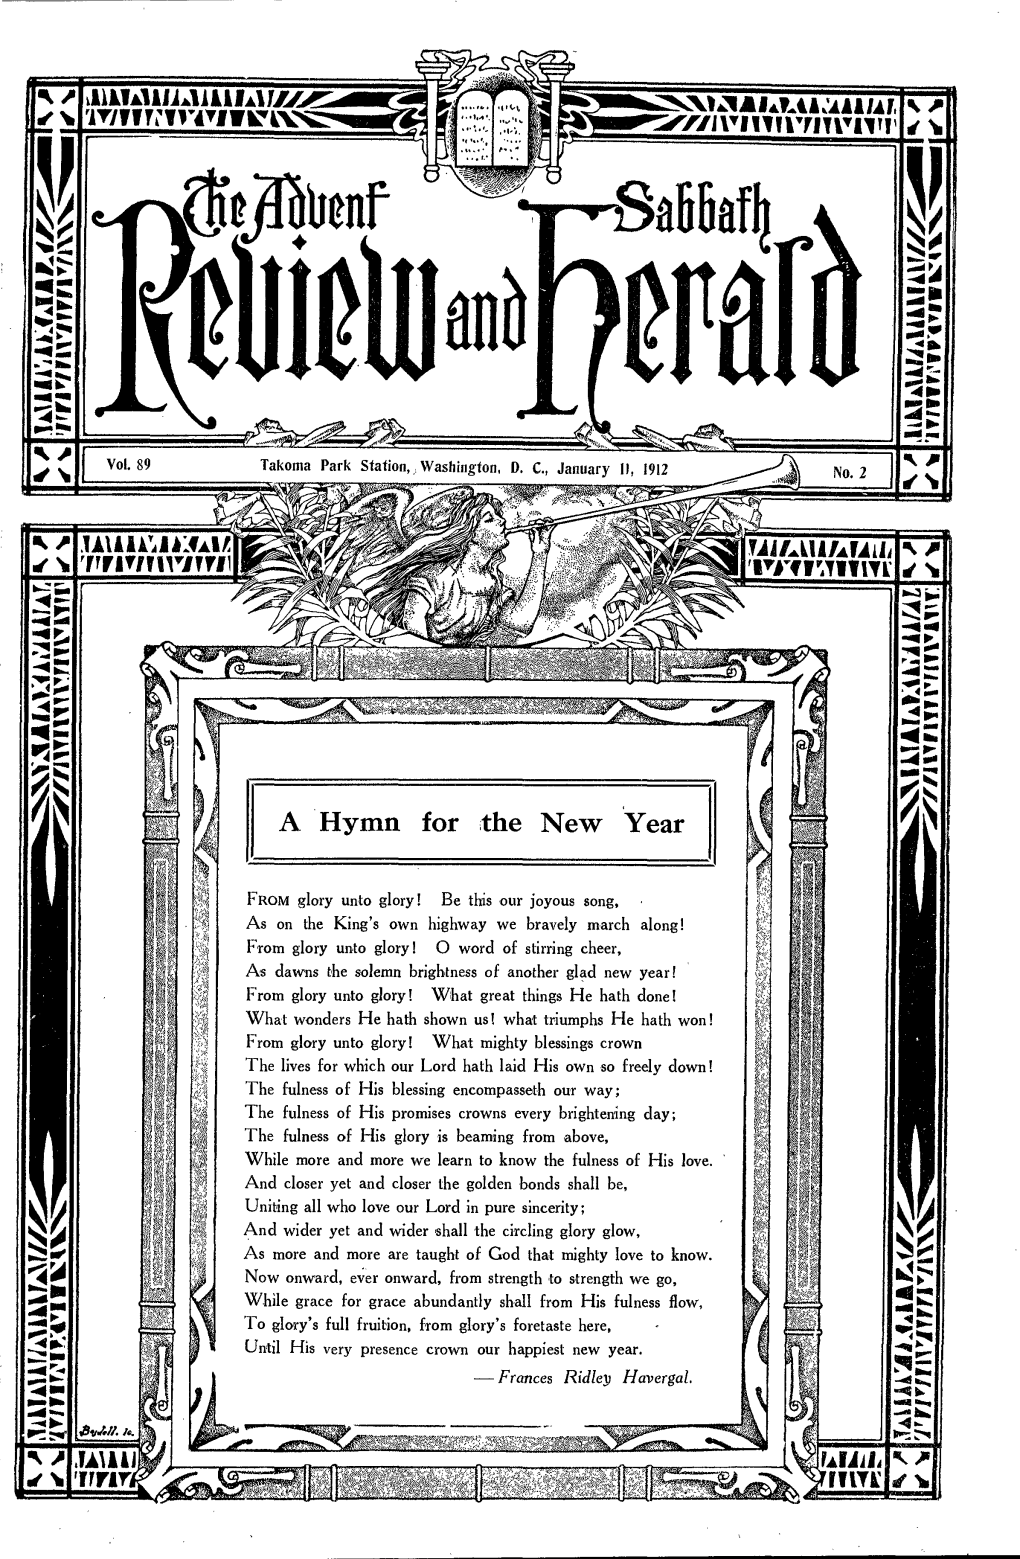 A Hymn for the New Year